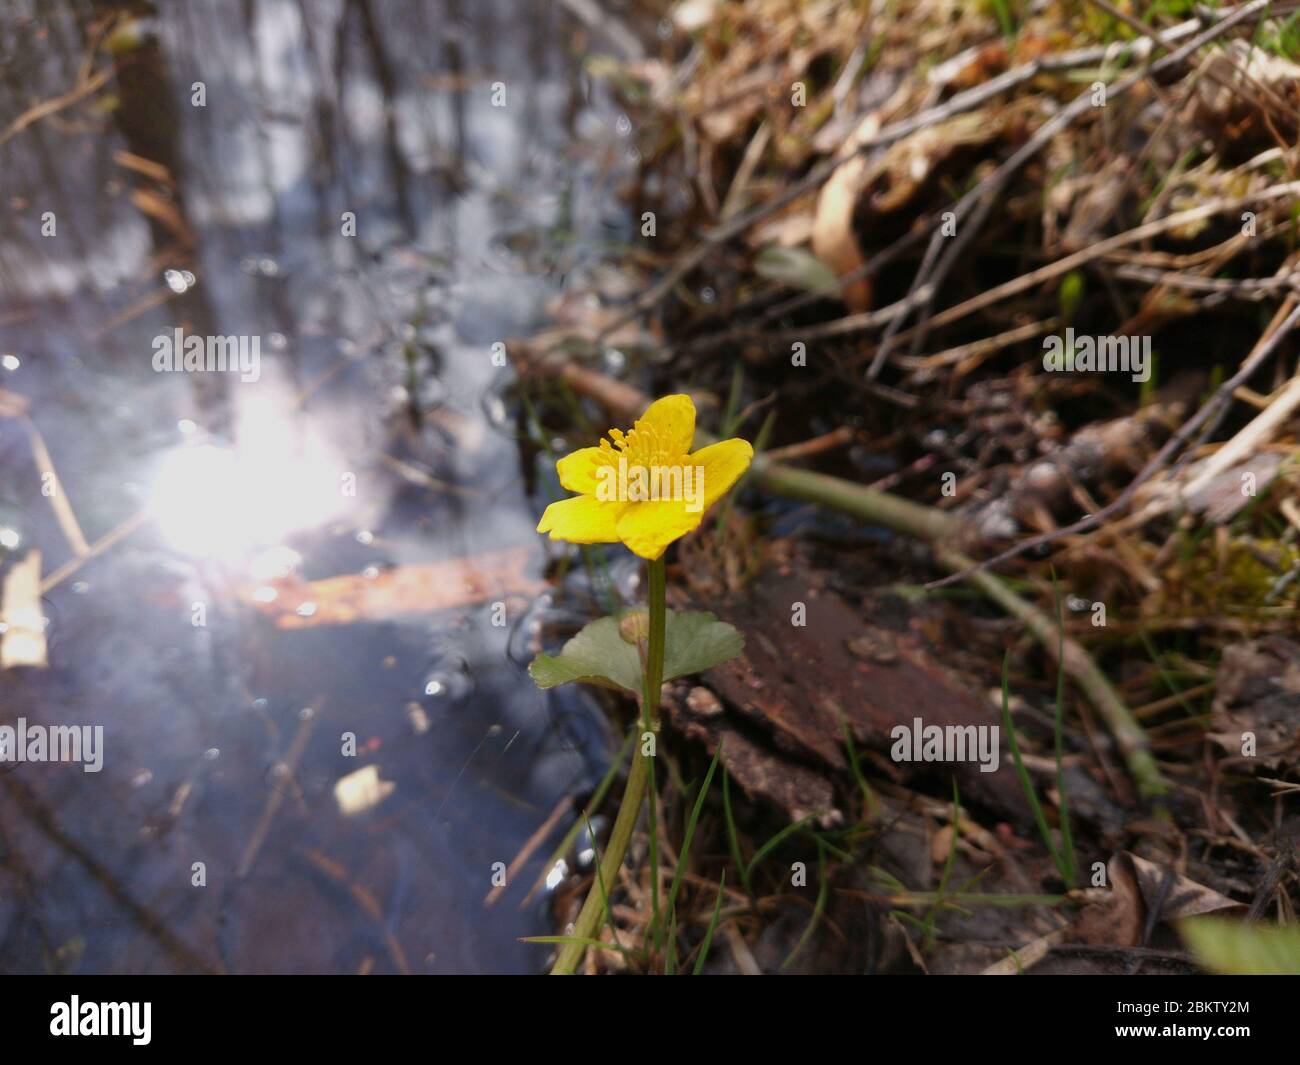 Image of one yellow single flower blooming in early spring. Stock Photo